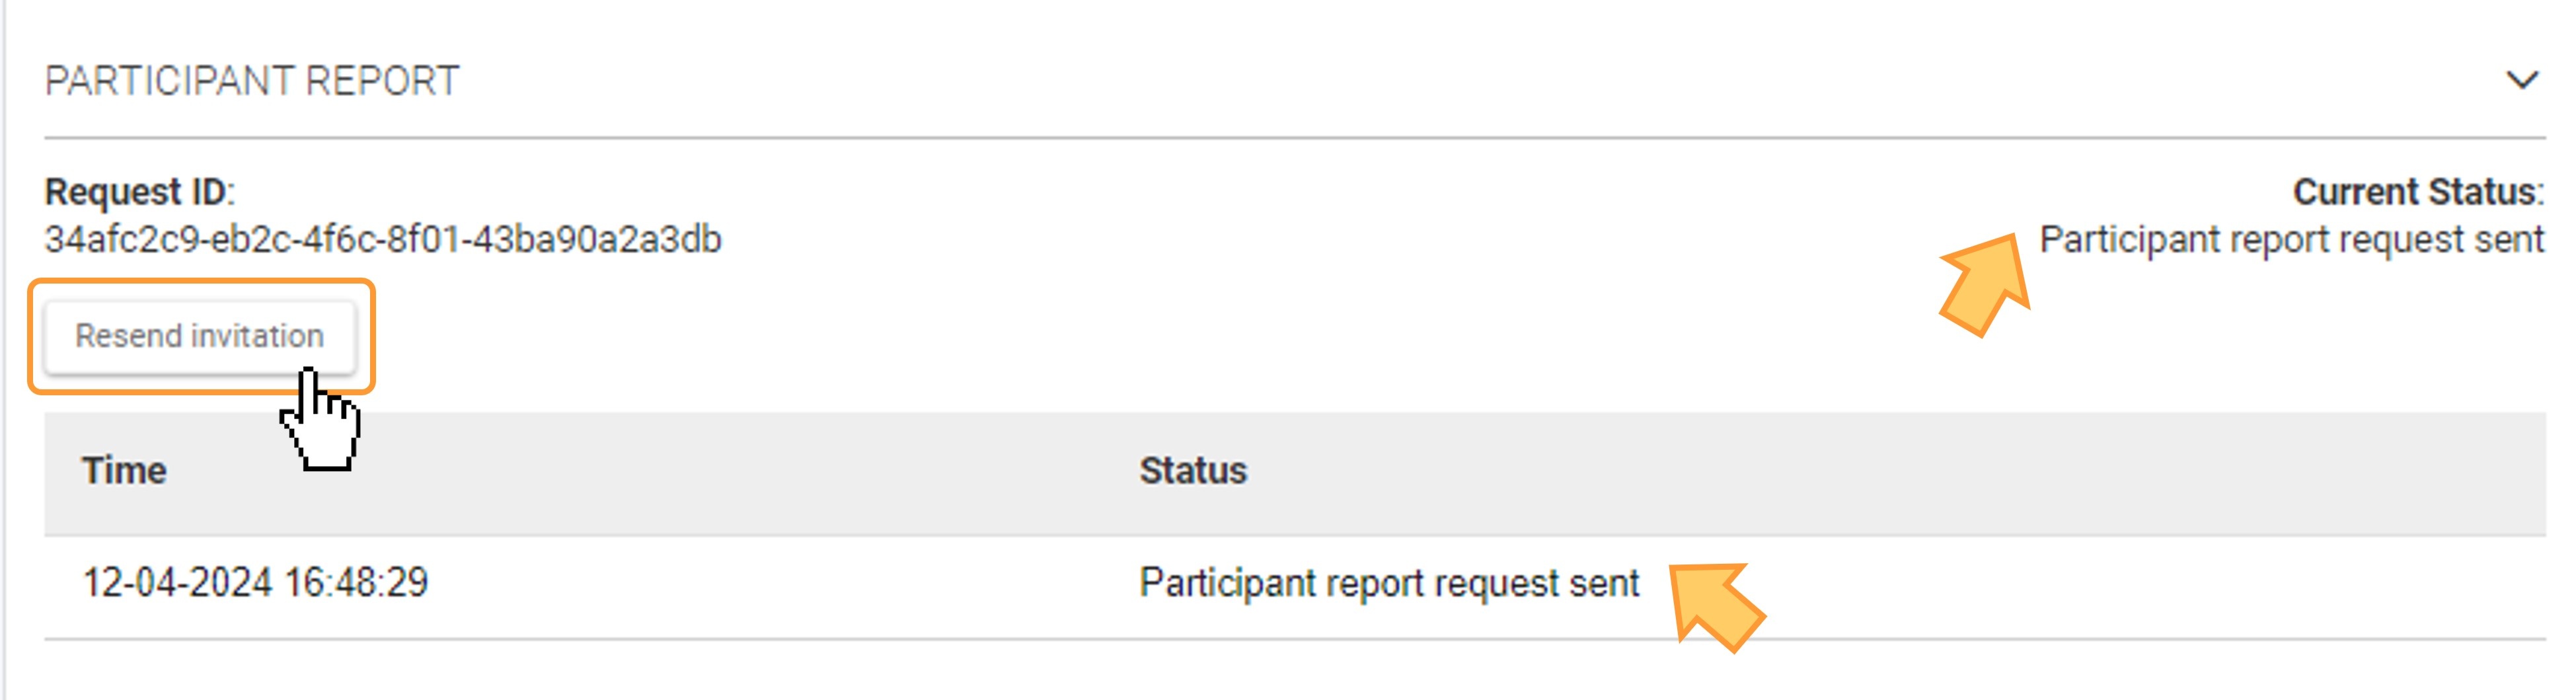 Resent the invitation to submit the participant report